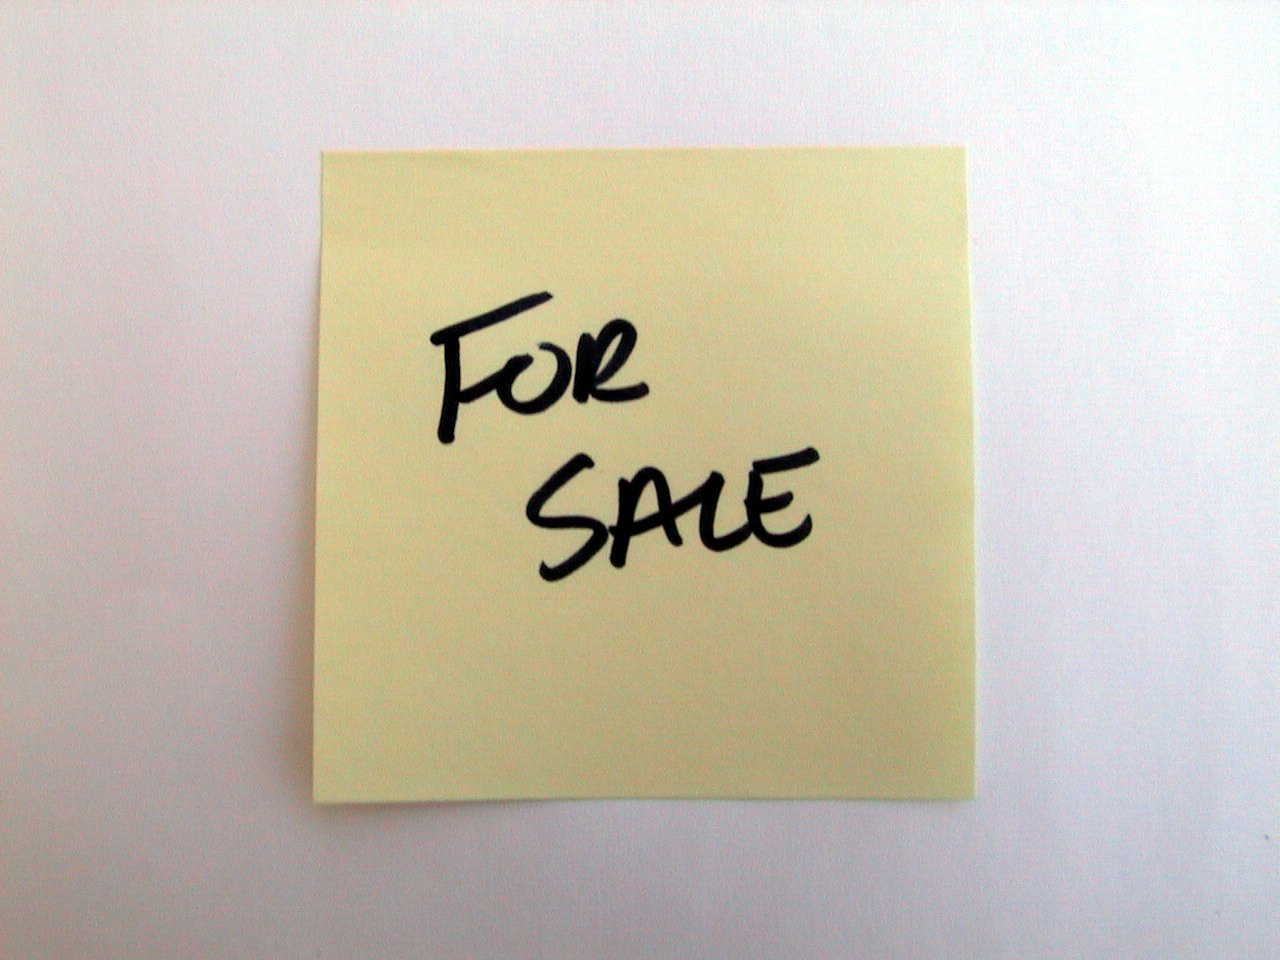 a yellow note that says toe sale written on it